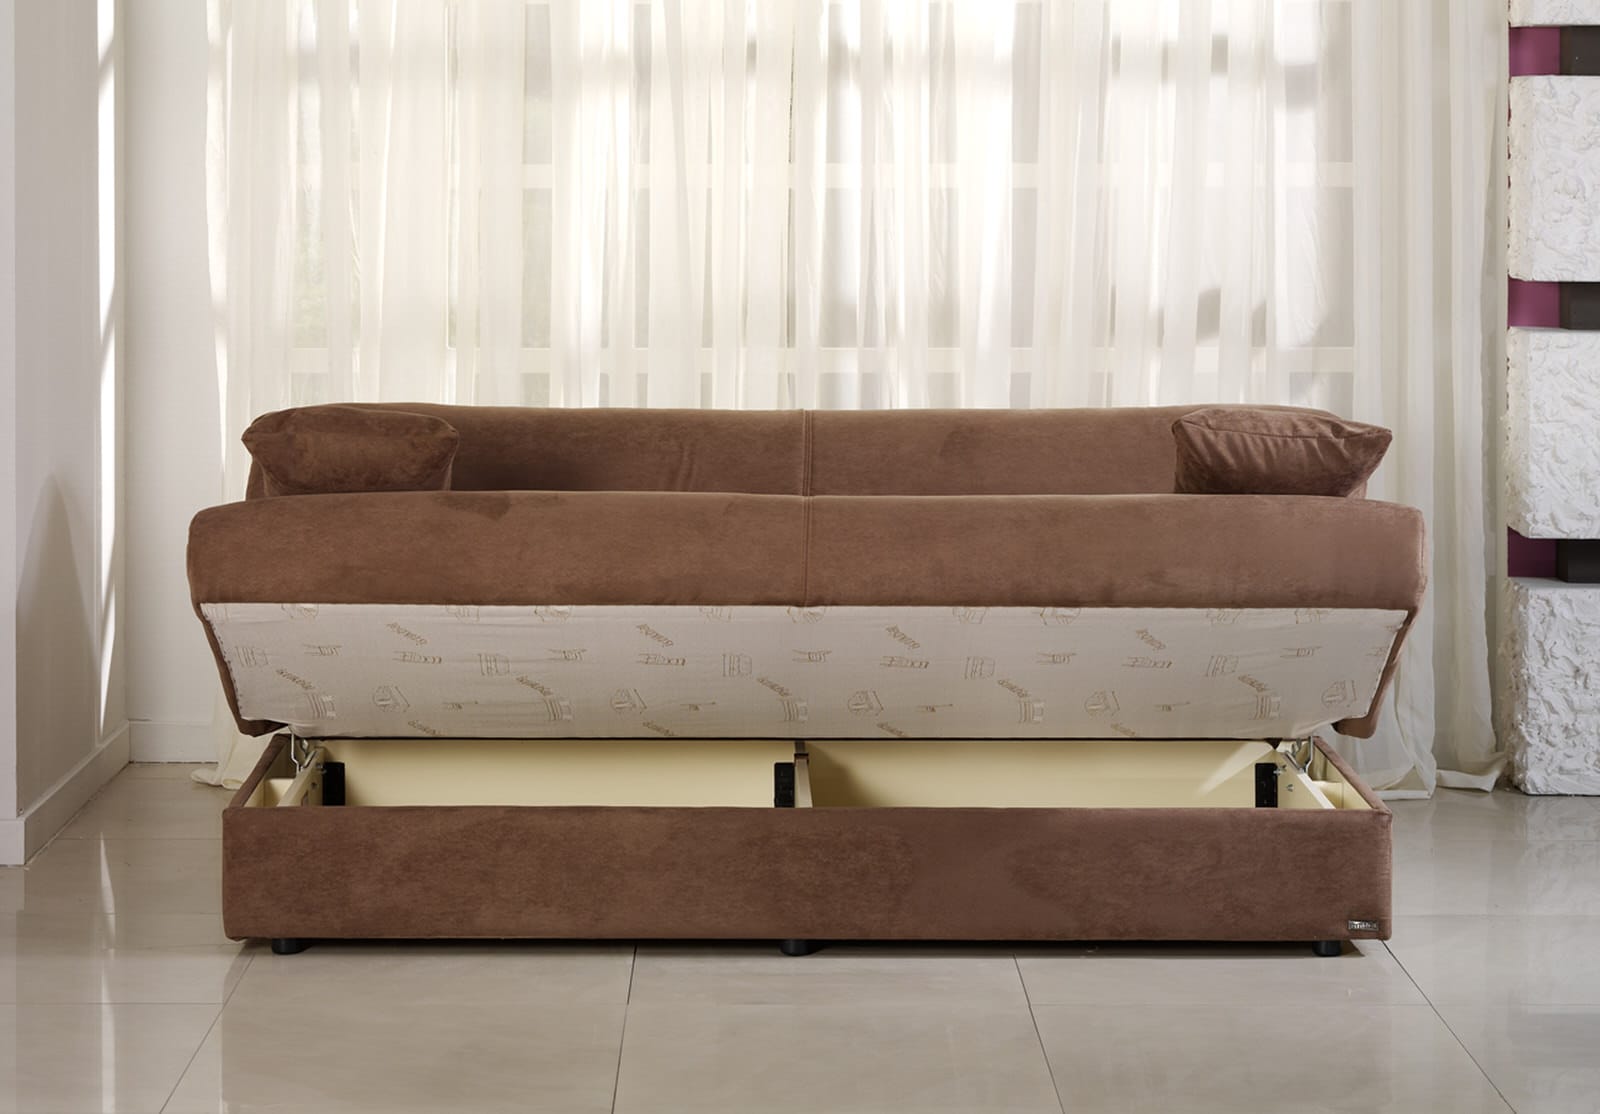 Regata Obsession Truffle Convertible Sofa Bed by Sunset